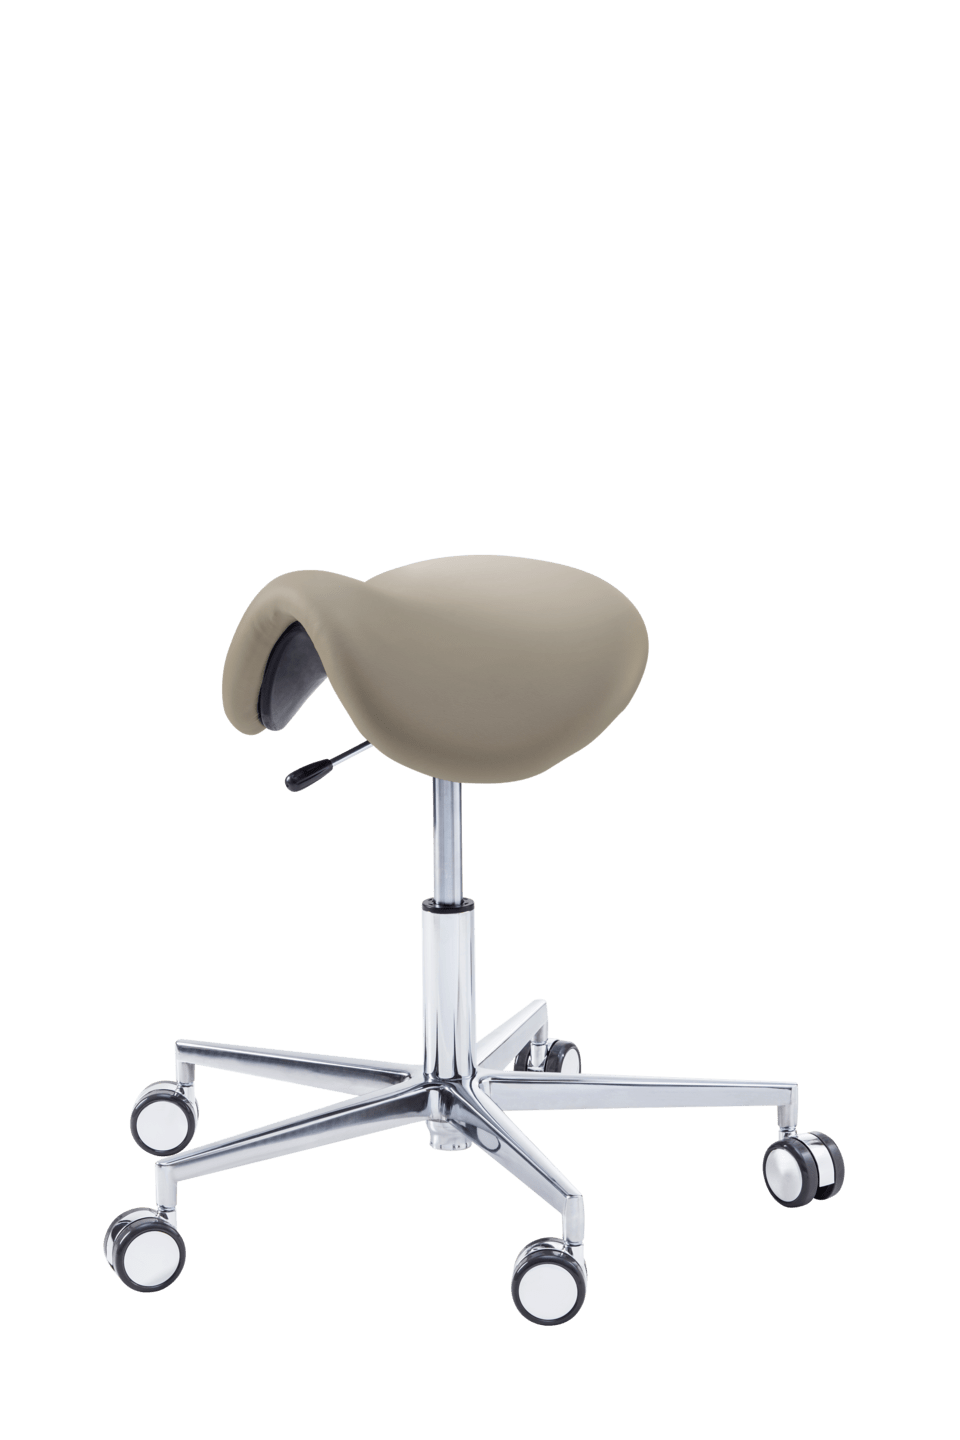 RUCK - STOOL saddle in sand